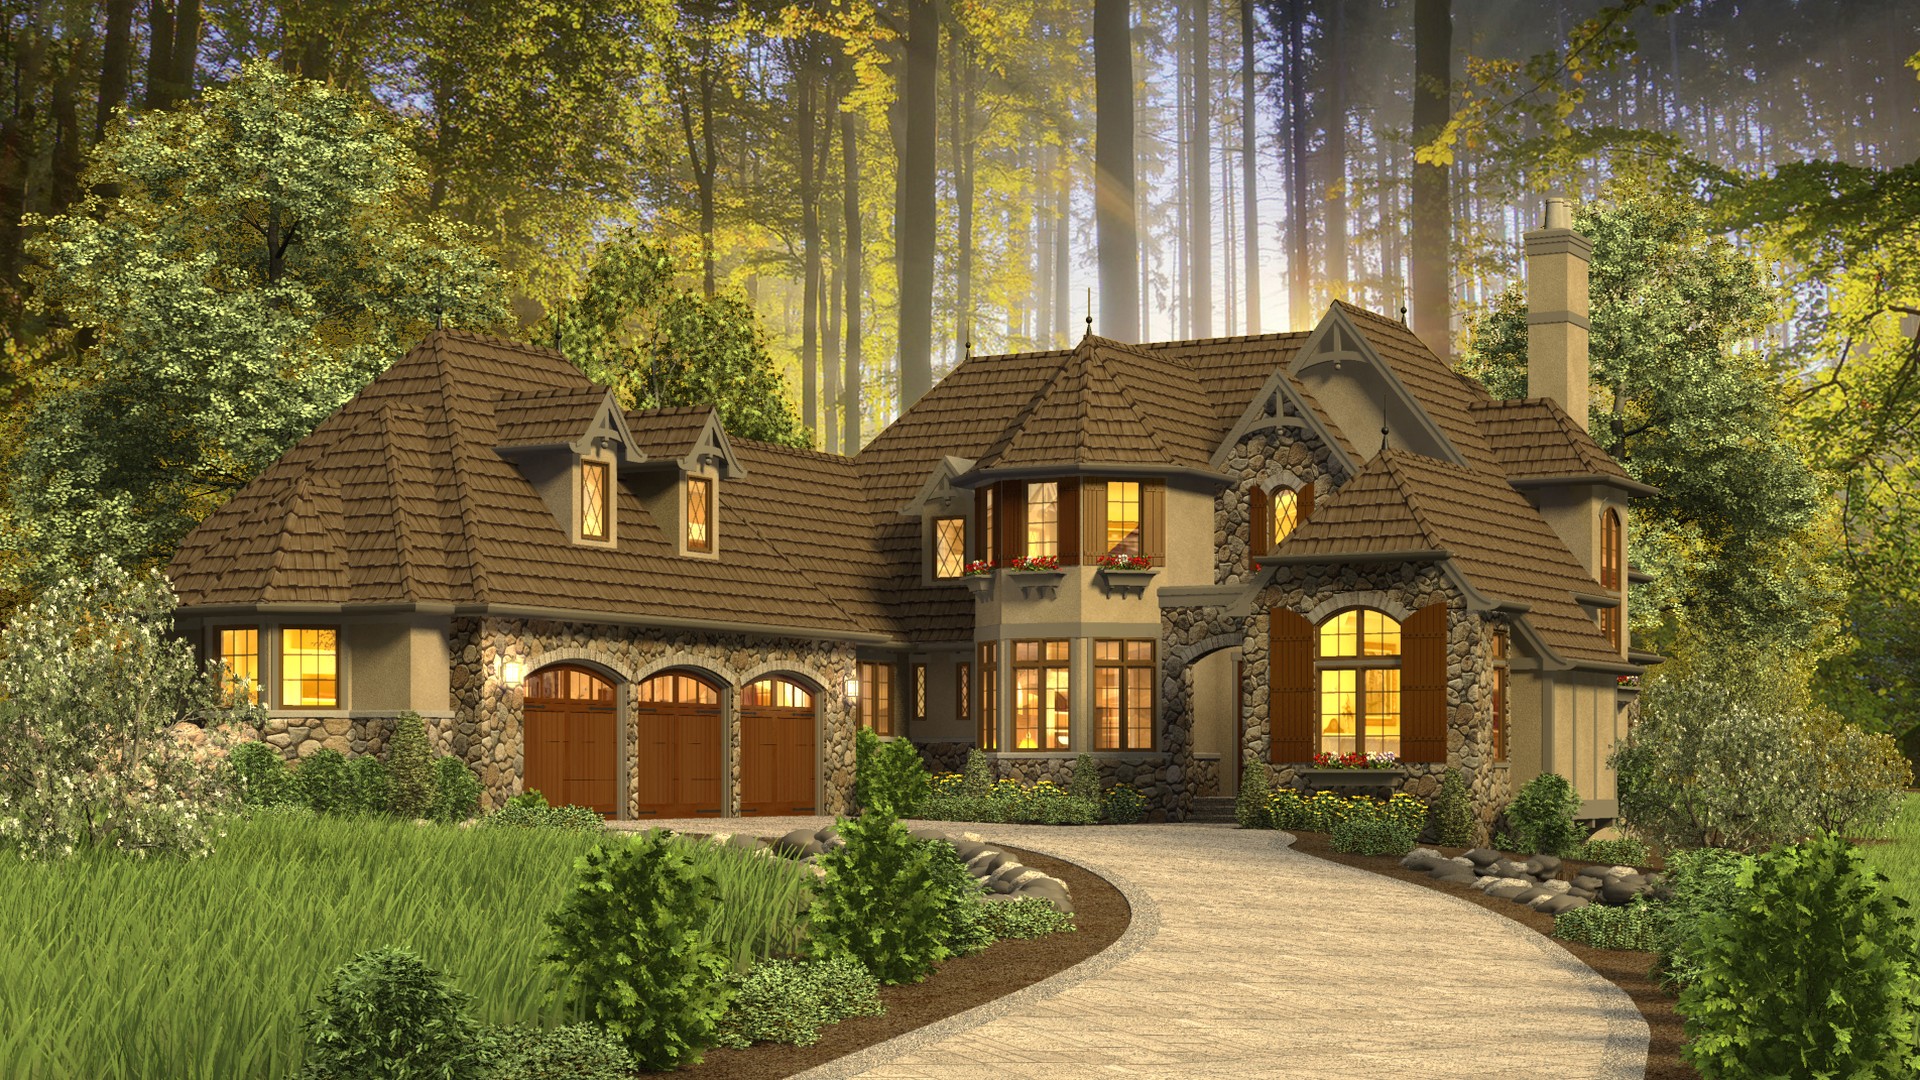 Cottage House  Plan  2470 The Rivendell Manor 4142 Sqft 3 